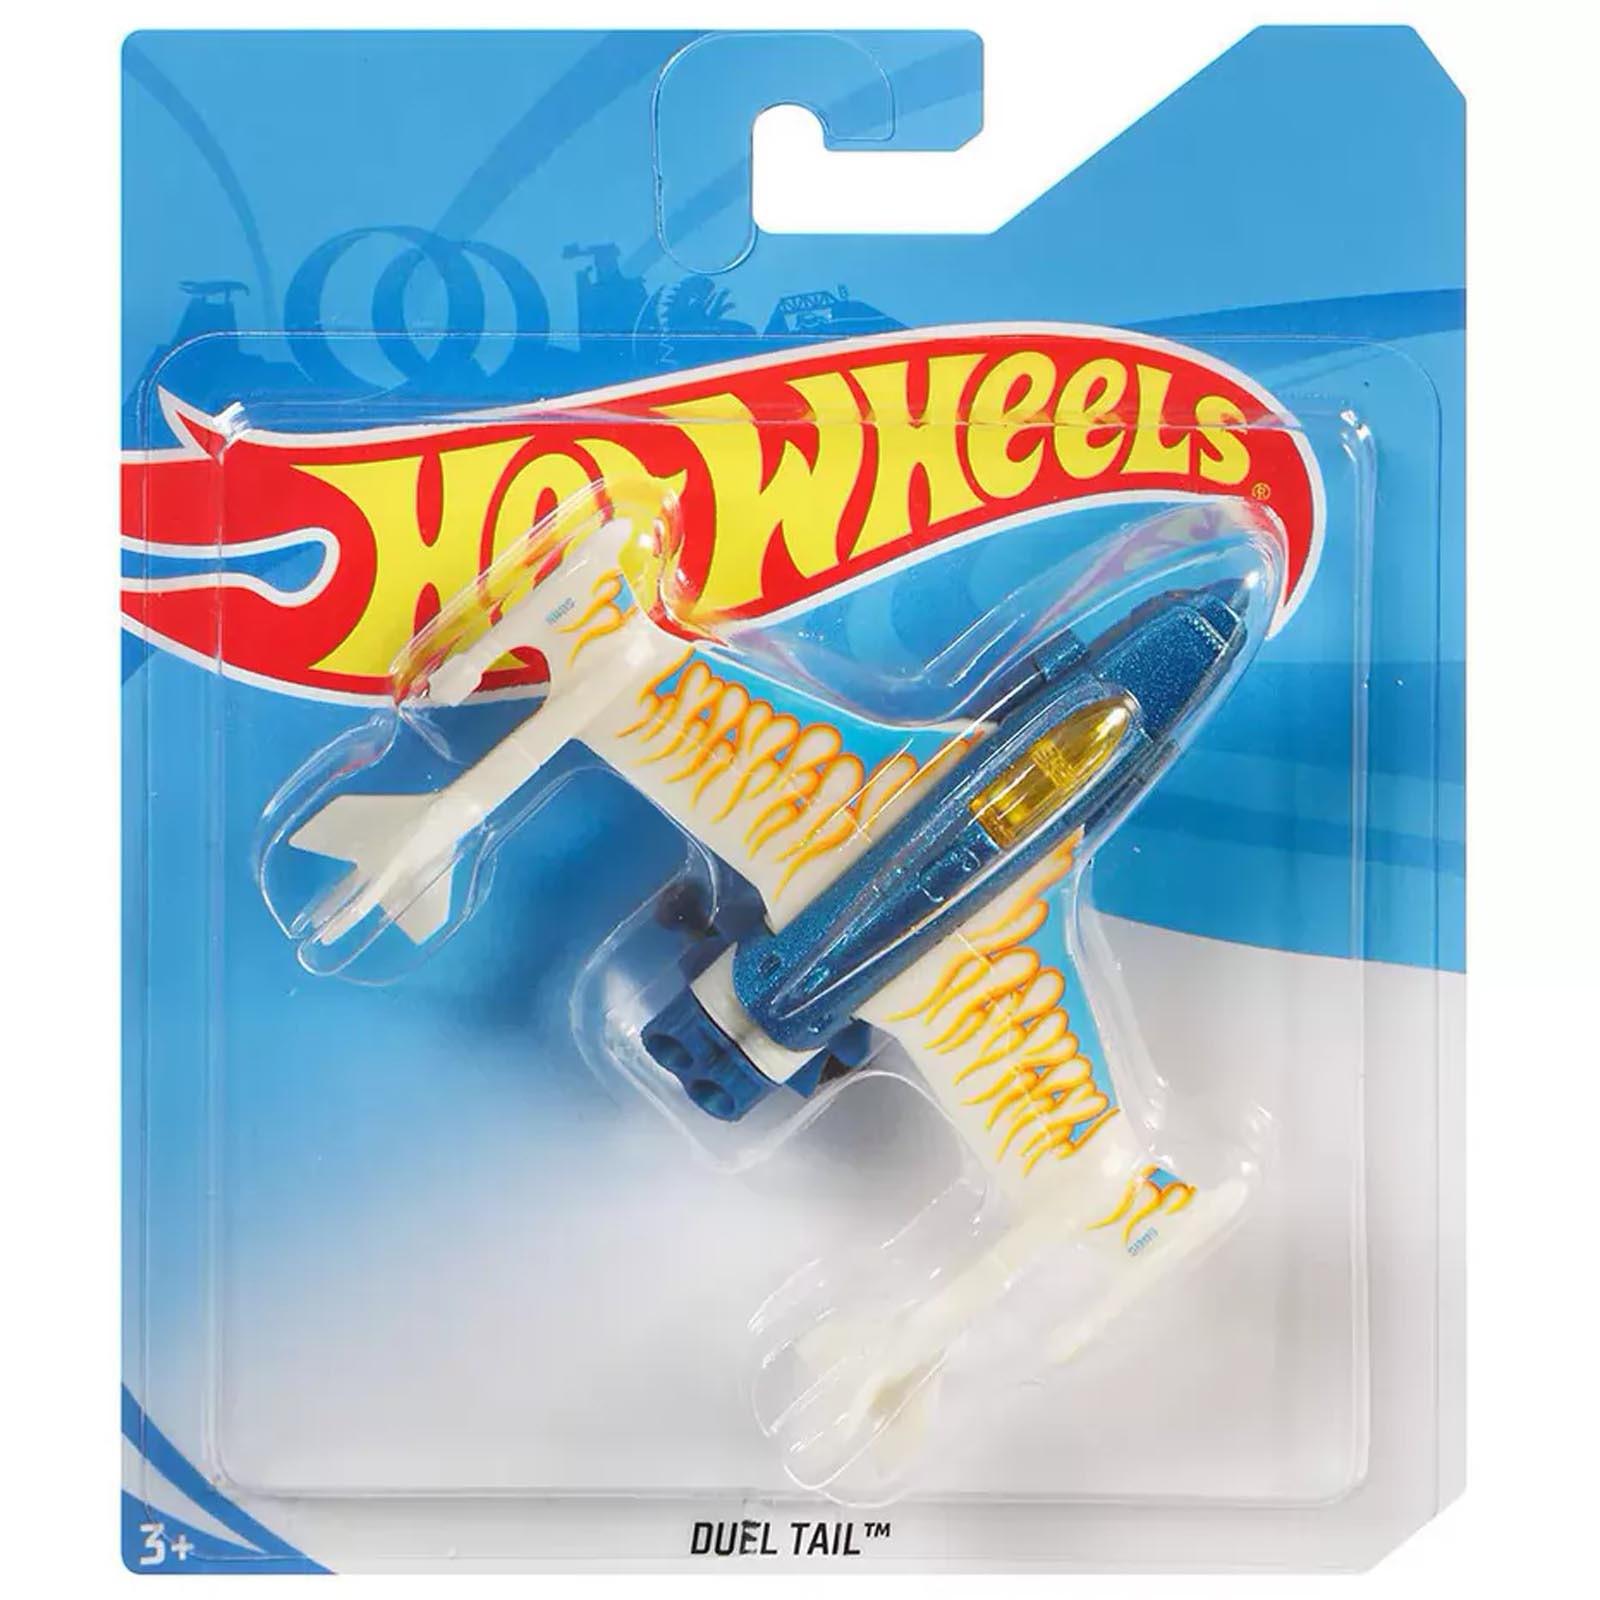 Hot Wheels Sky Busters Assortment Duel Tail